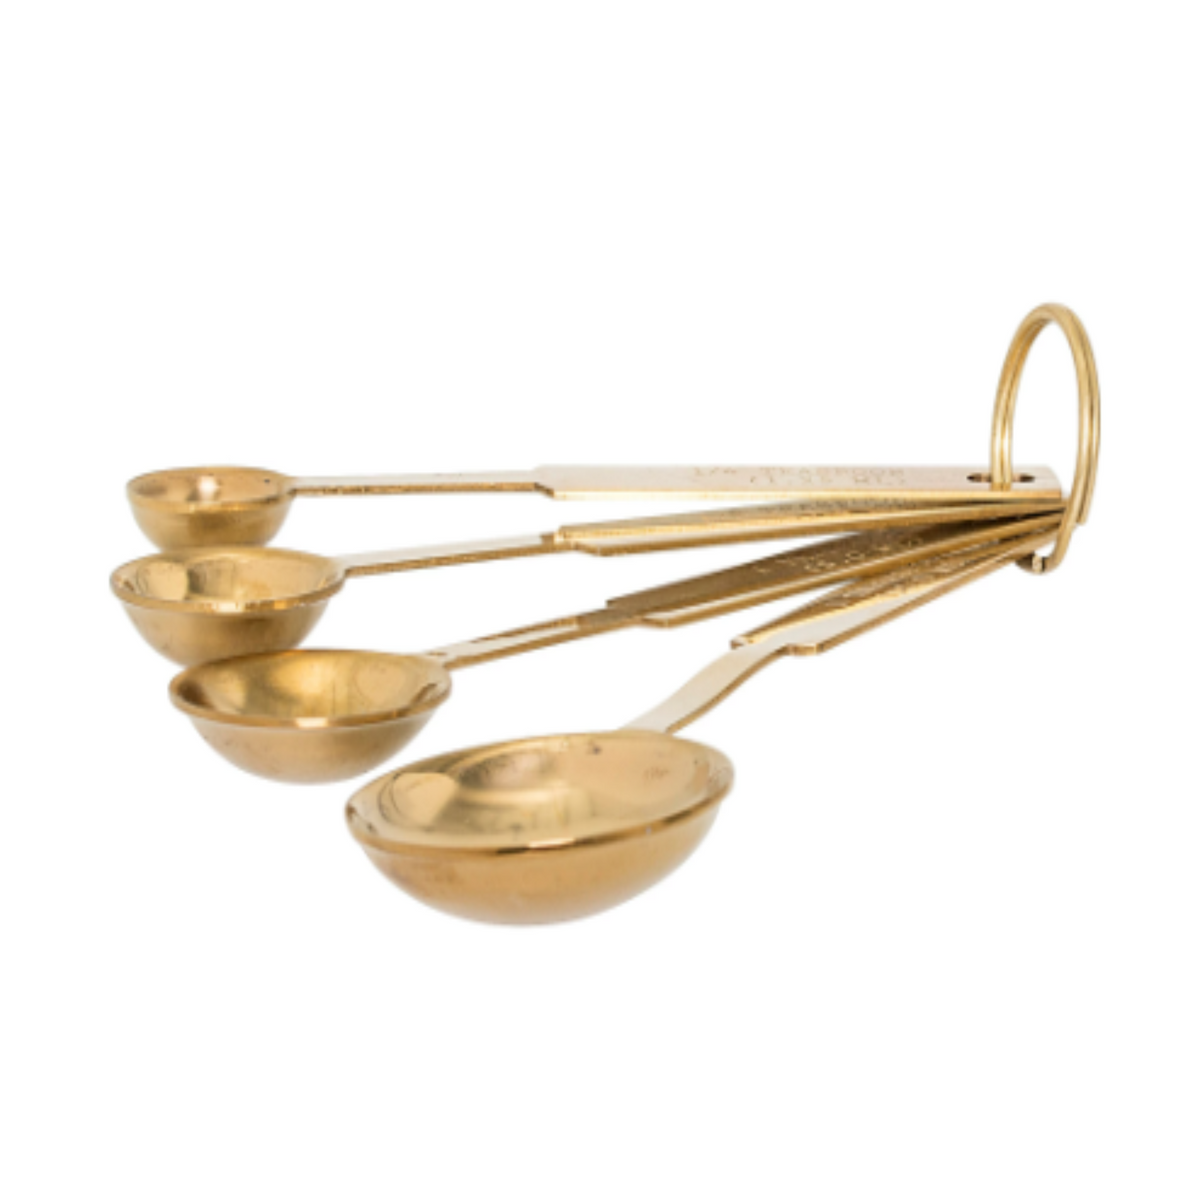 Stainless Steel Measuring Spoons, Set of 4 - Gold Finish